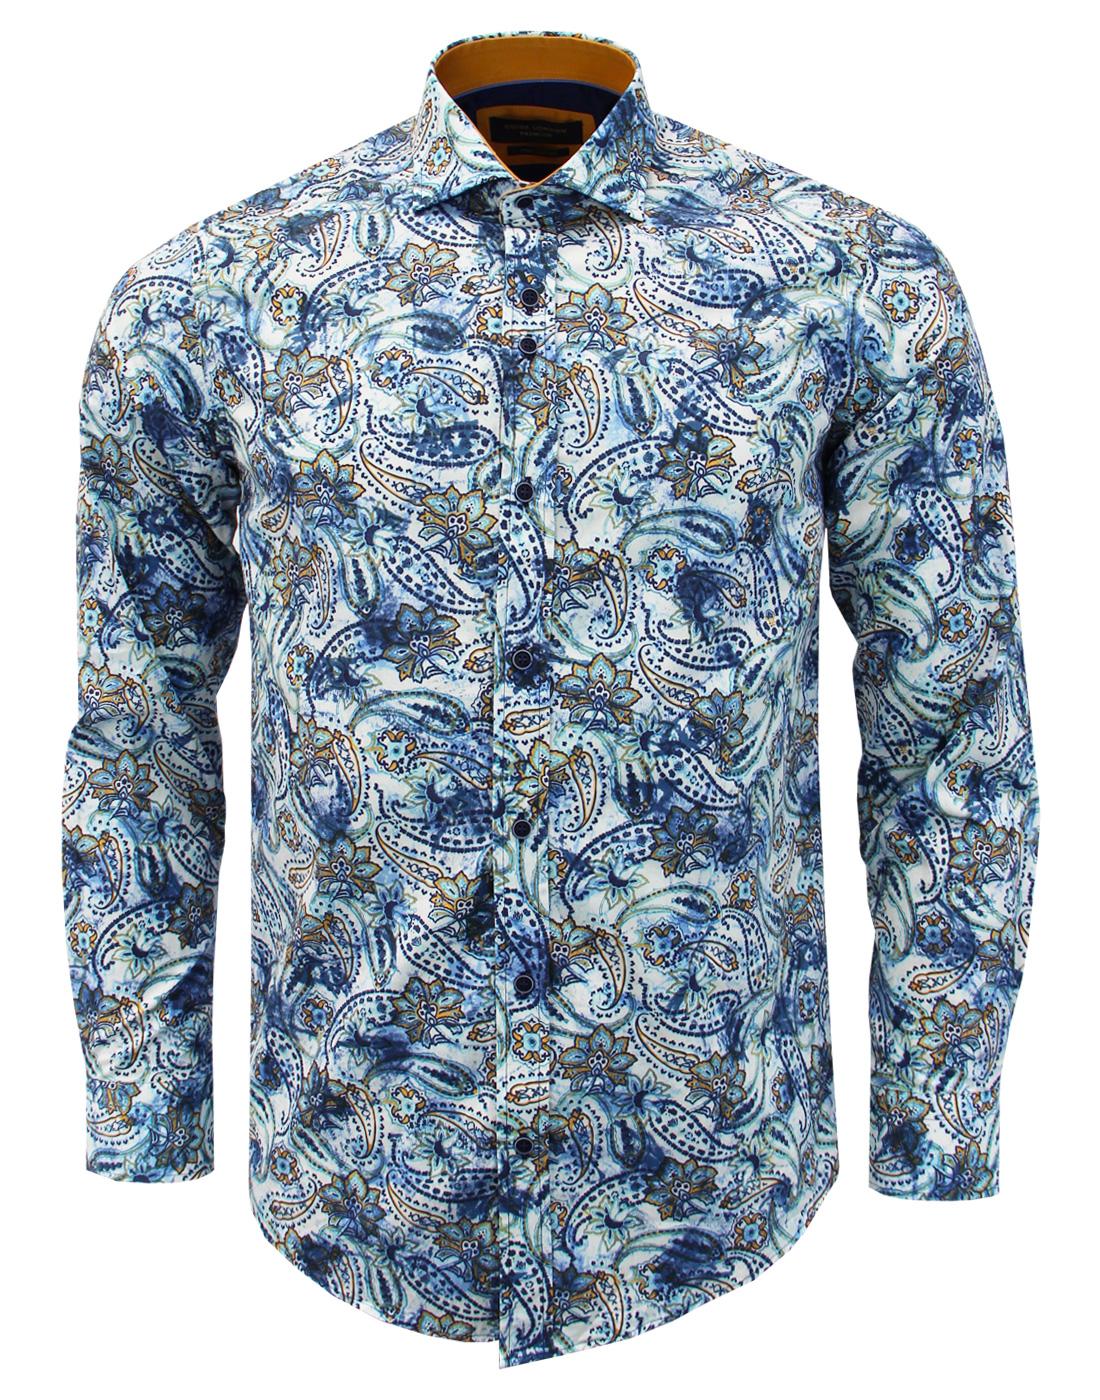 GUIDE LONDON 60s Mod Smudgy Paisley Floral Shirt